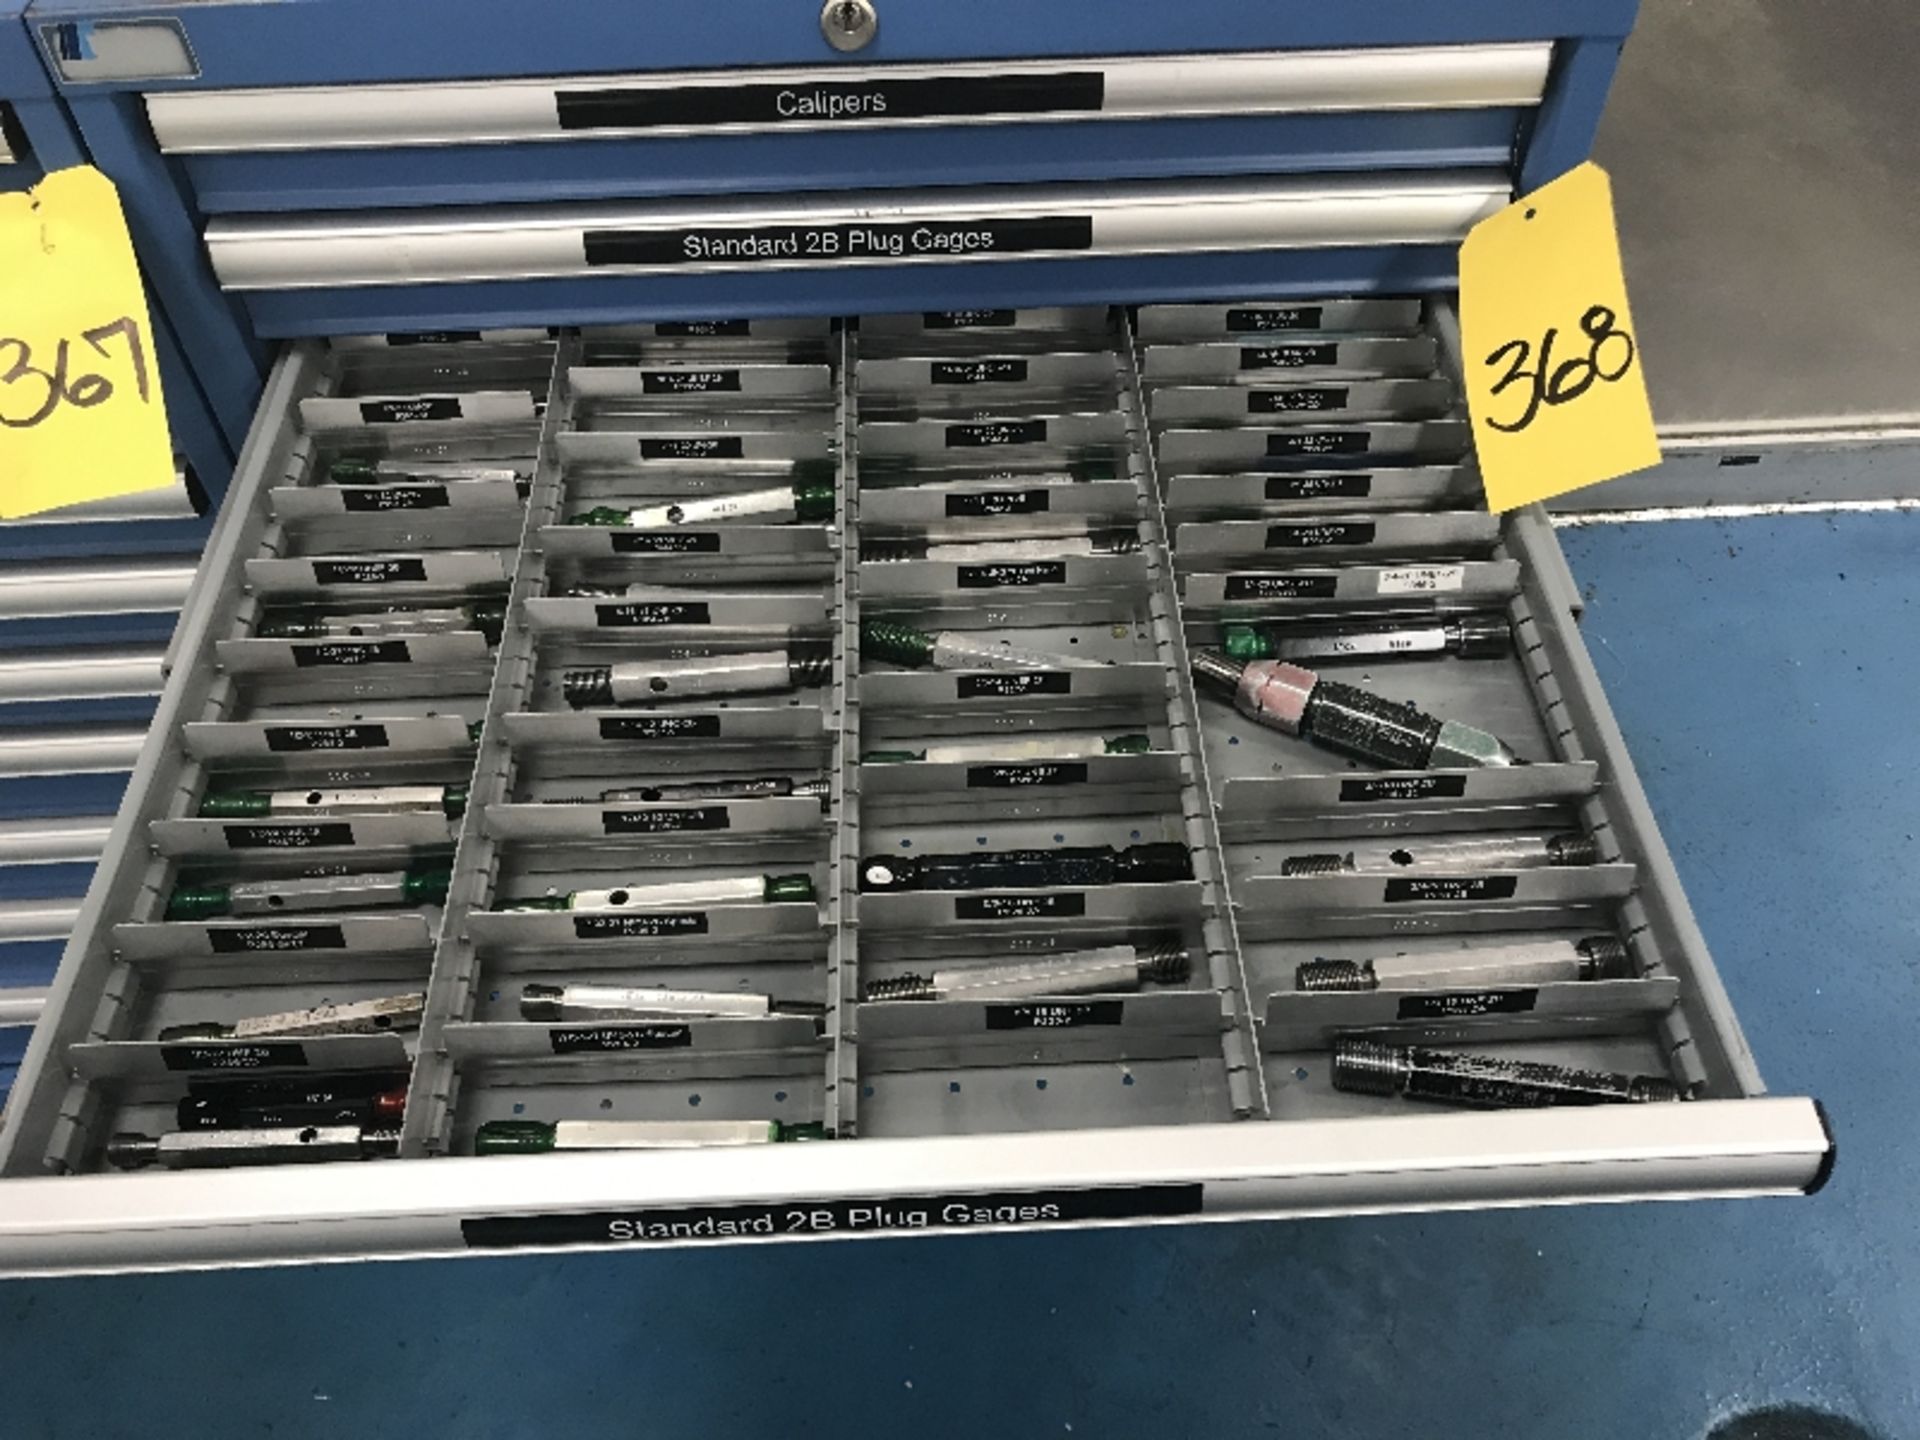 10-Drawer Lista Cabinet & Contents of Inspection Room Gages: Calipers, Standard 2B Plugs Gages, - Image 4 of 10